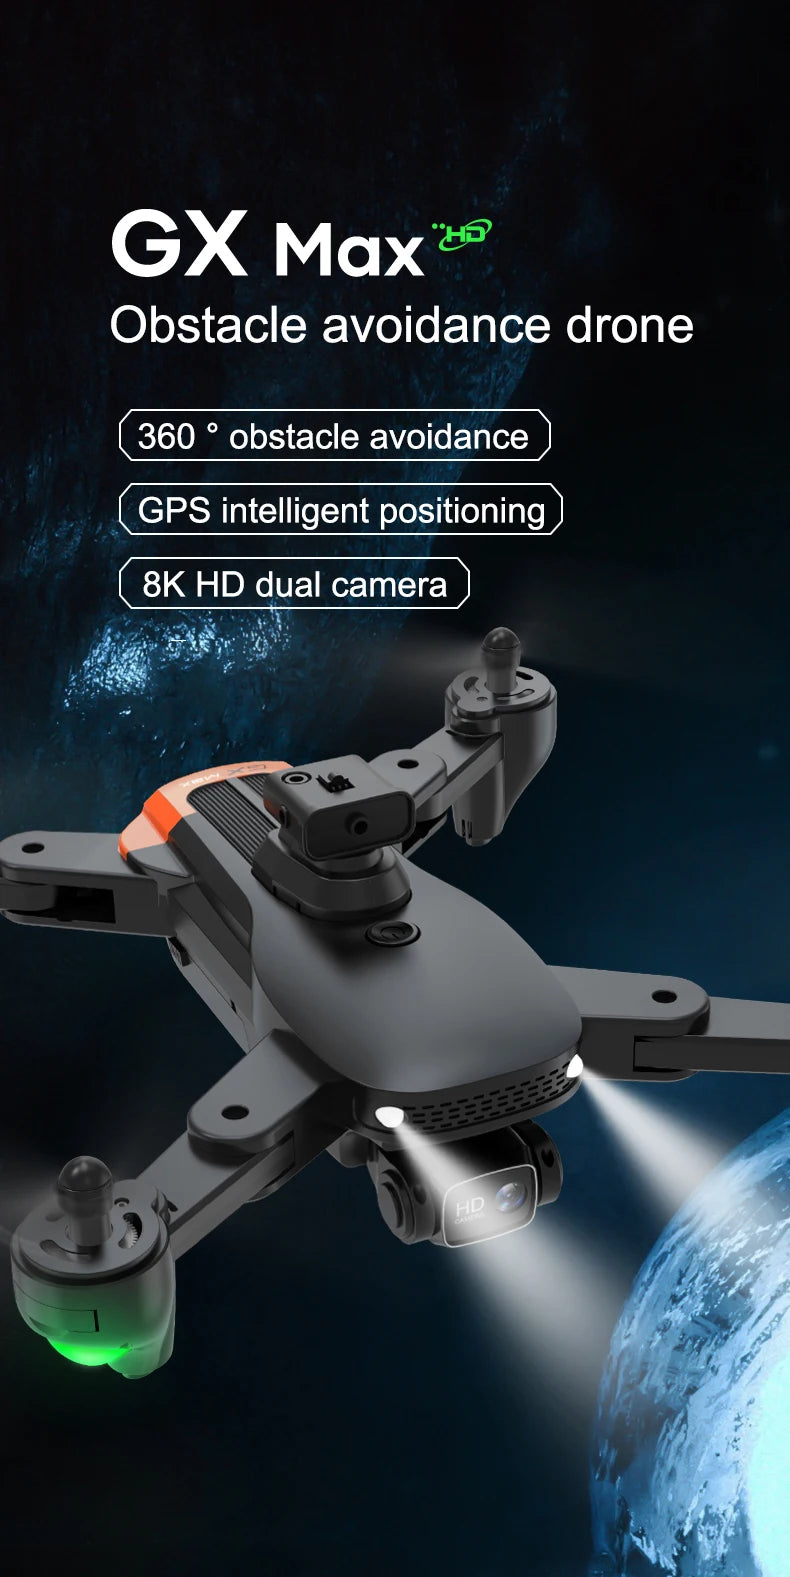 GD94 MAX Drone, H5 GX Max Obstacle avoidance drone 360 obstacle avoidance GPS intelligent positioning 8